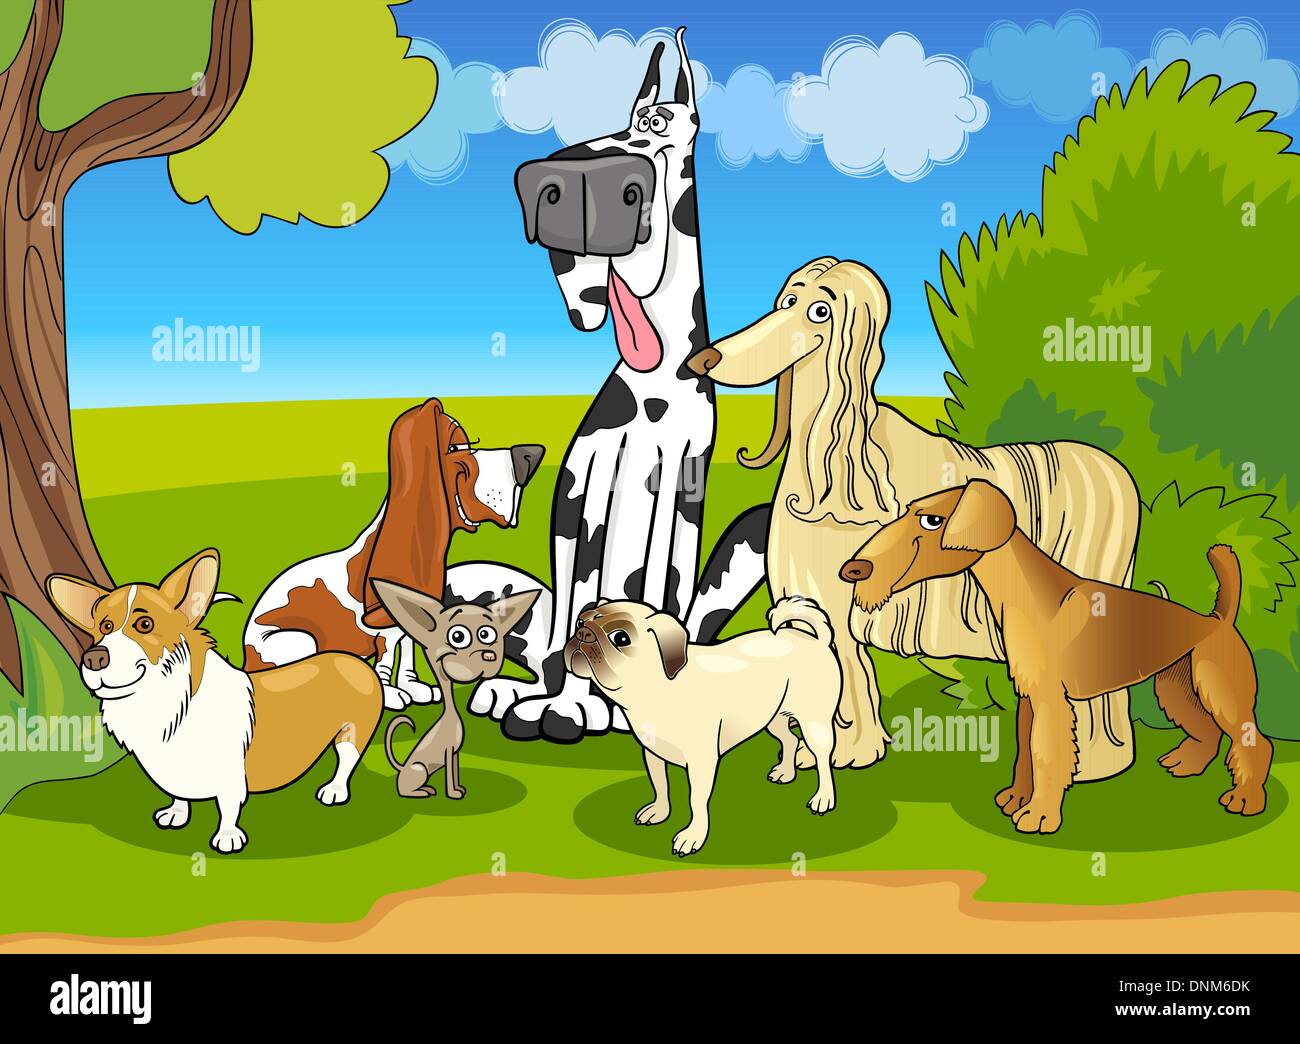 Cartoon Illustration of Cute Purebred Dogs or Puppies Group against Rural Scene with Blue Sky Stock Vector